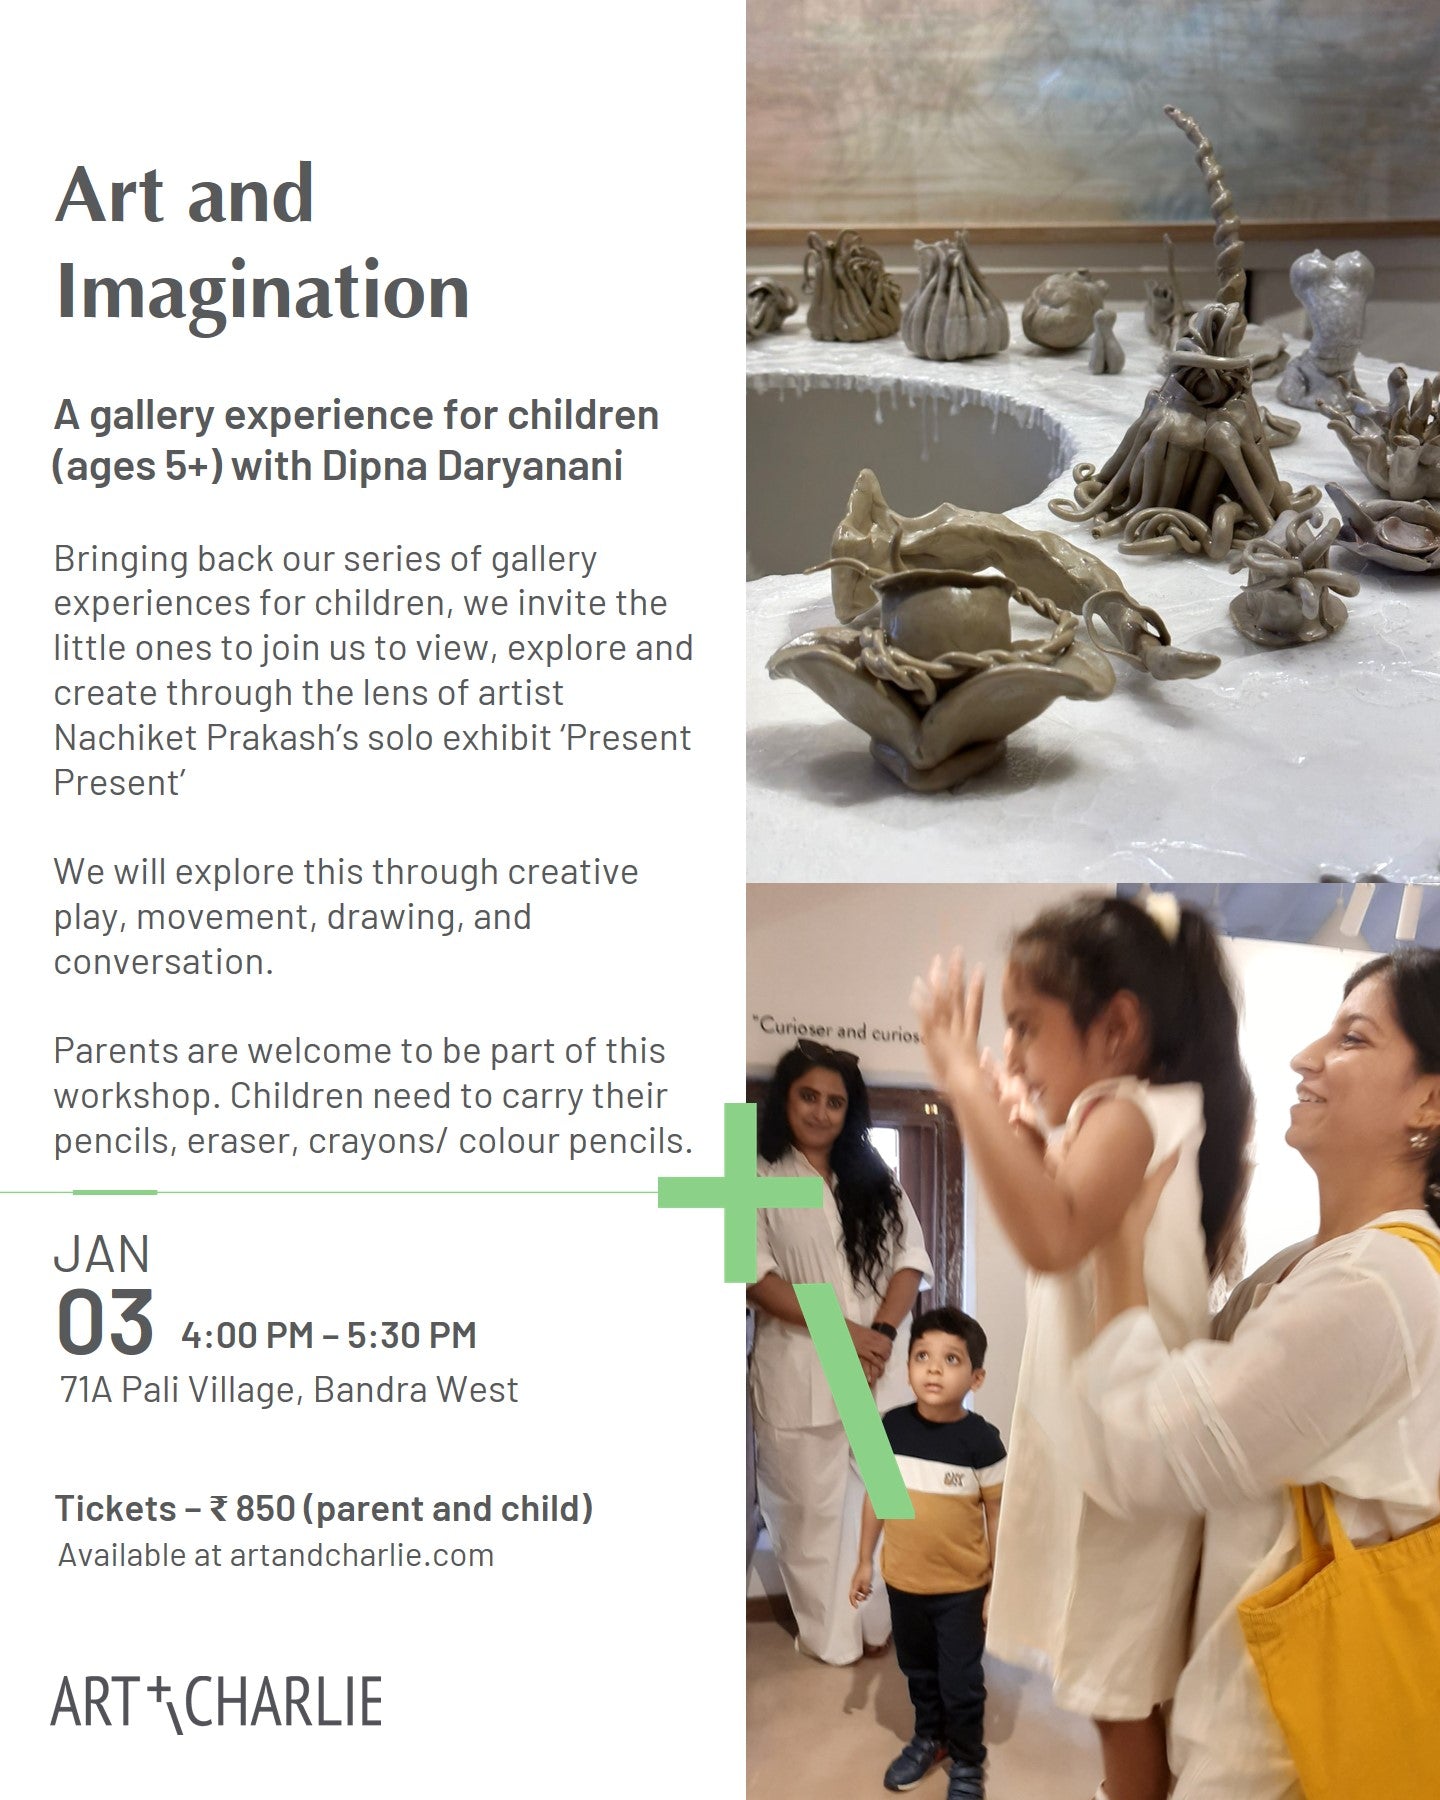 Ticket - Art and Imagination - 03 Jan - 4 PM